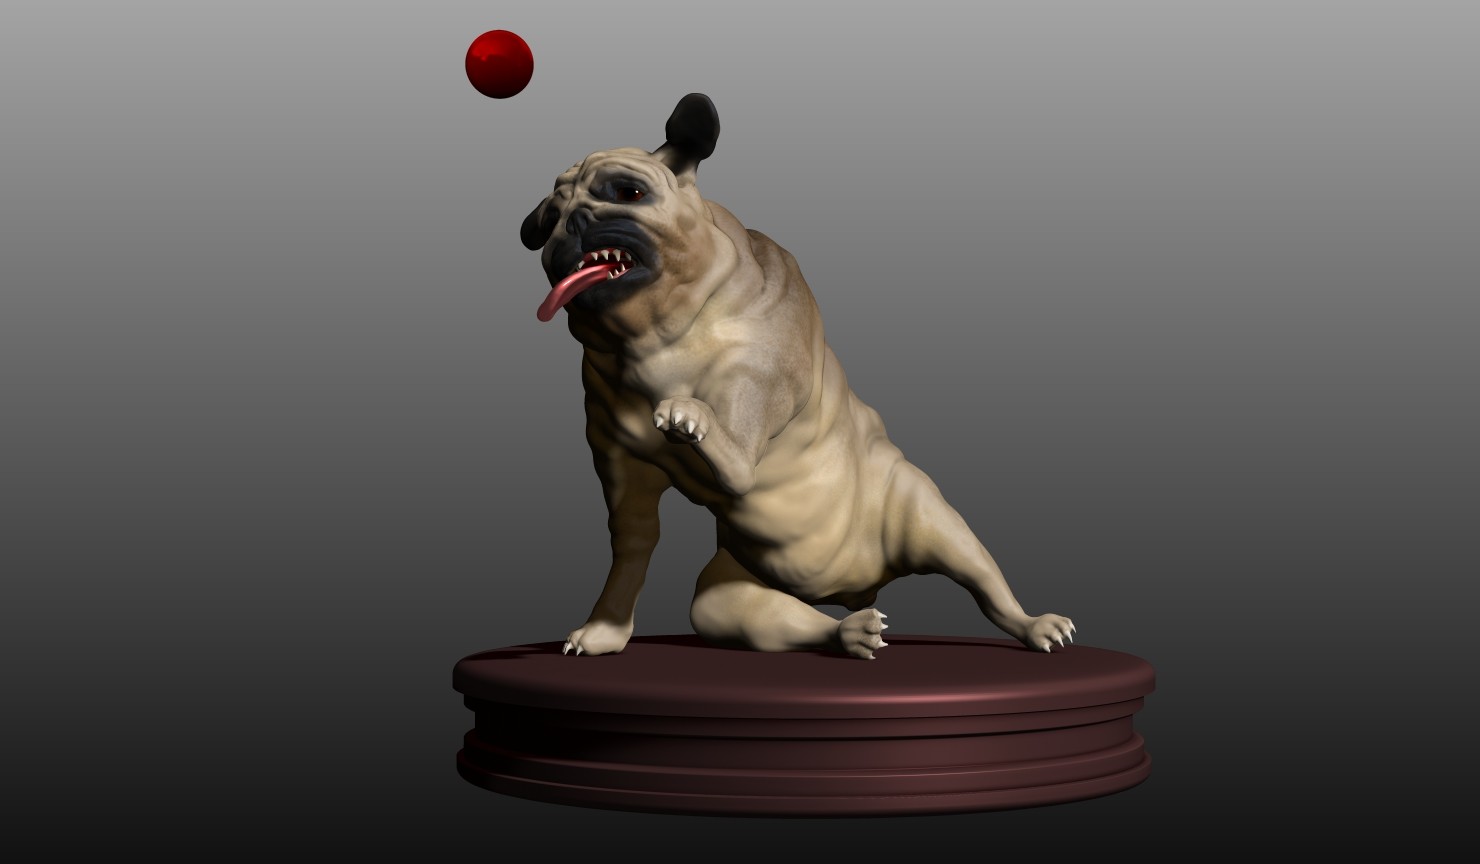 Participated in a speedsculpt competition. The task was to sculpt a dog. This is my entry.